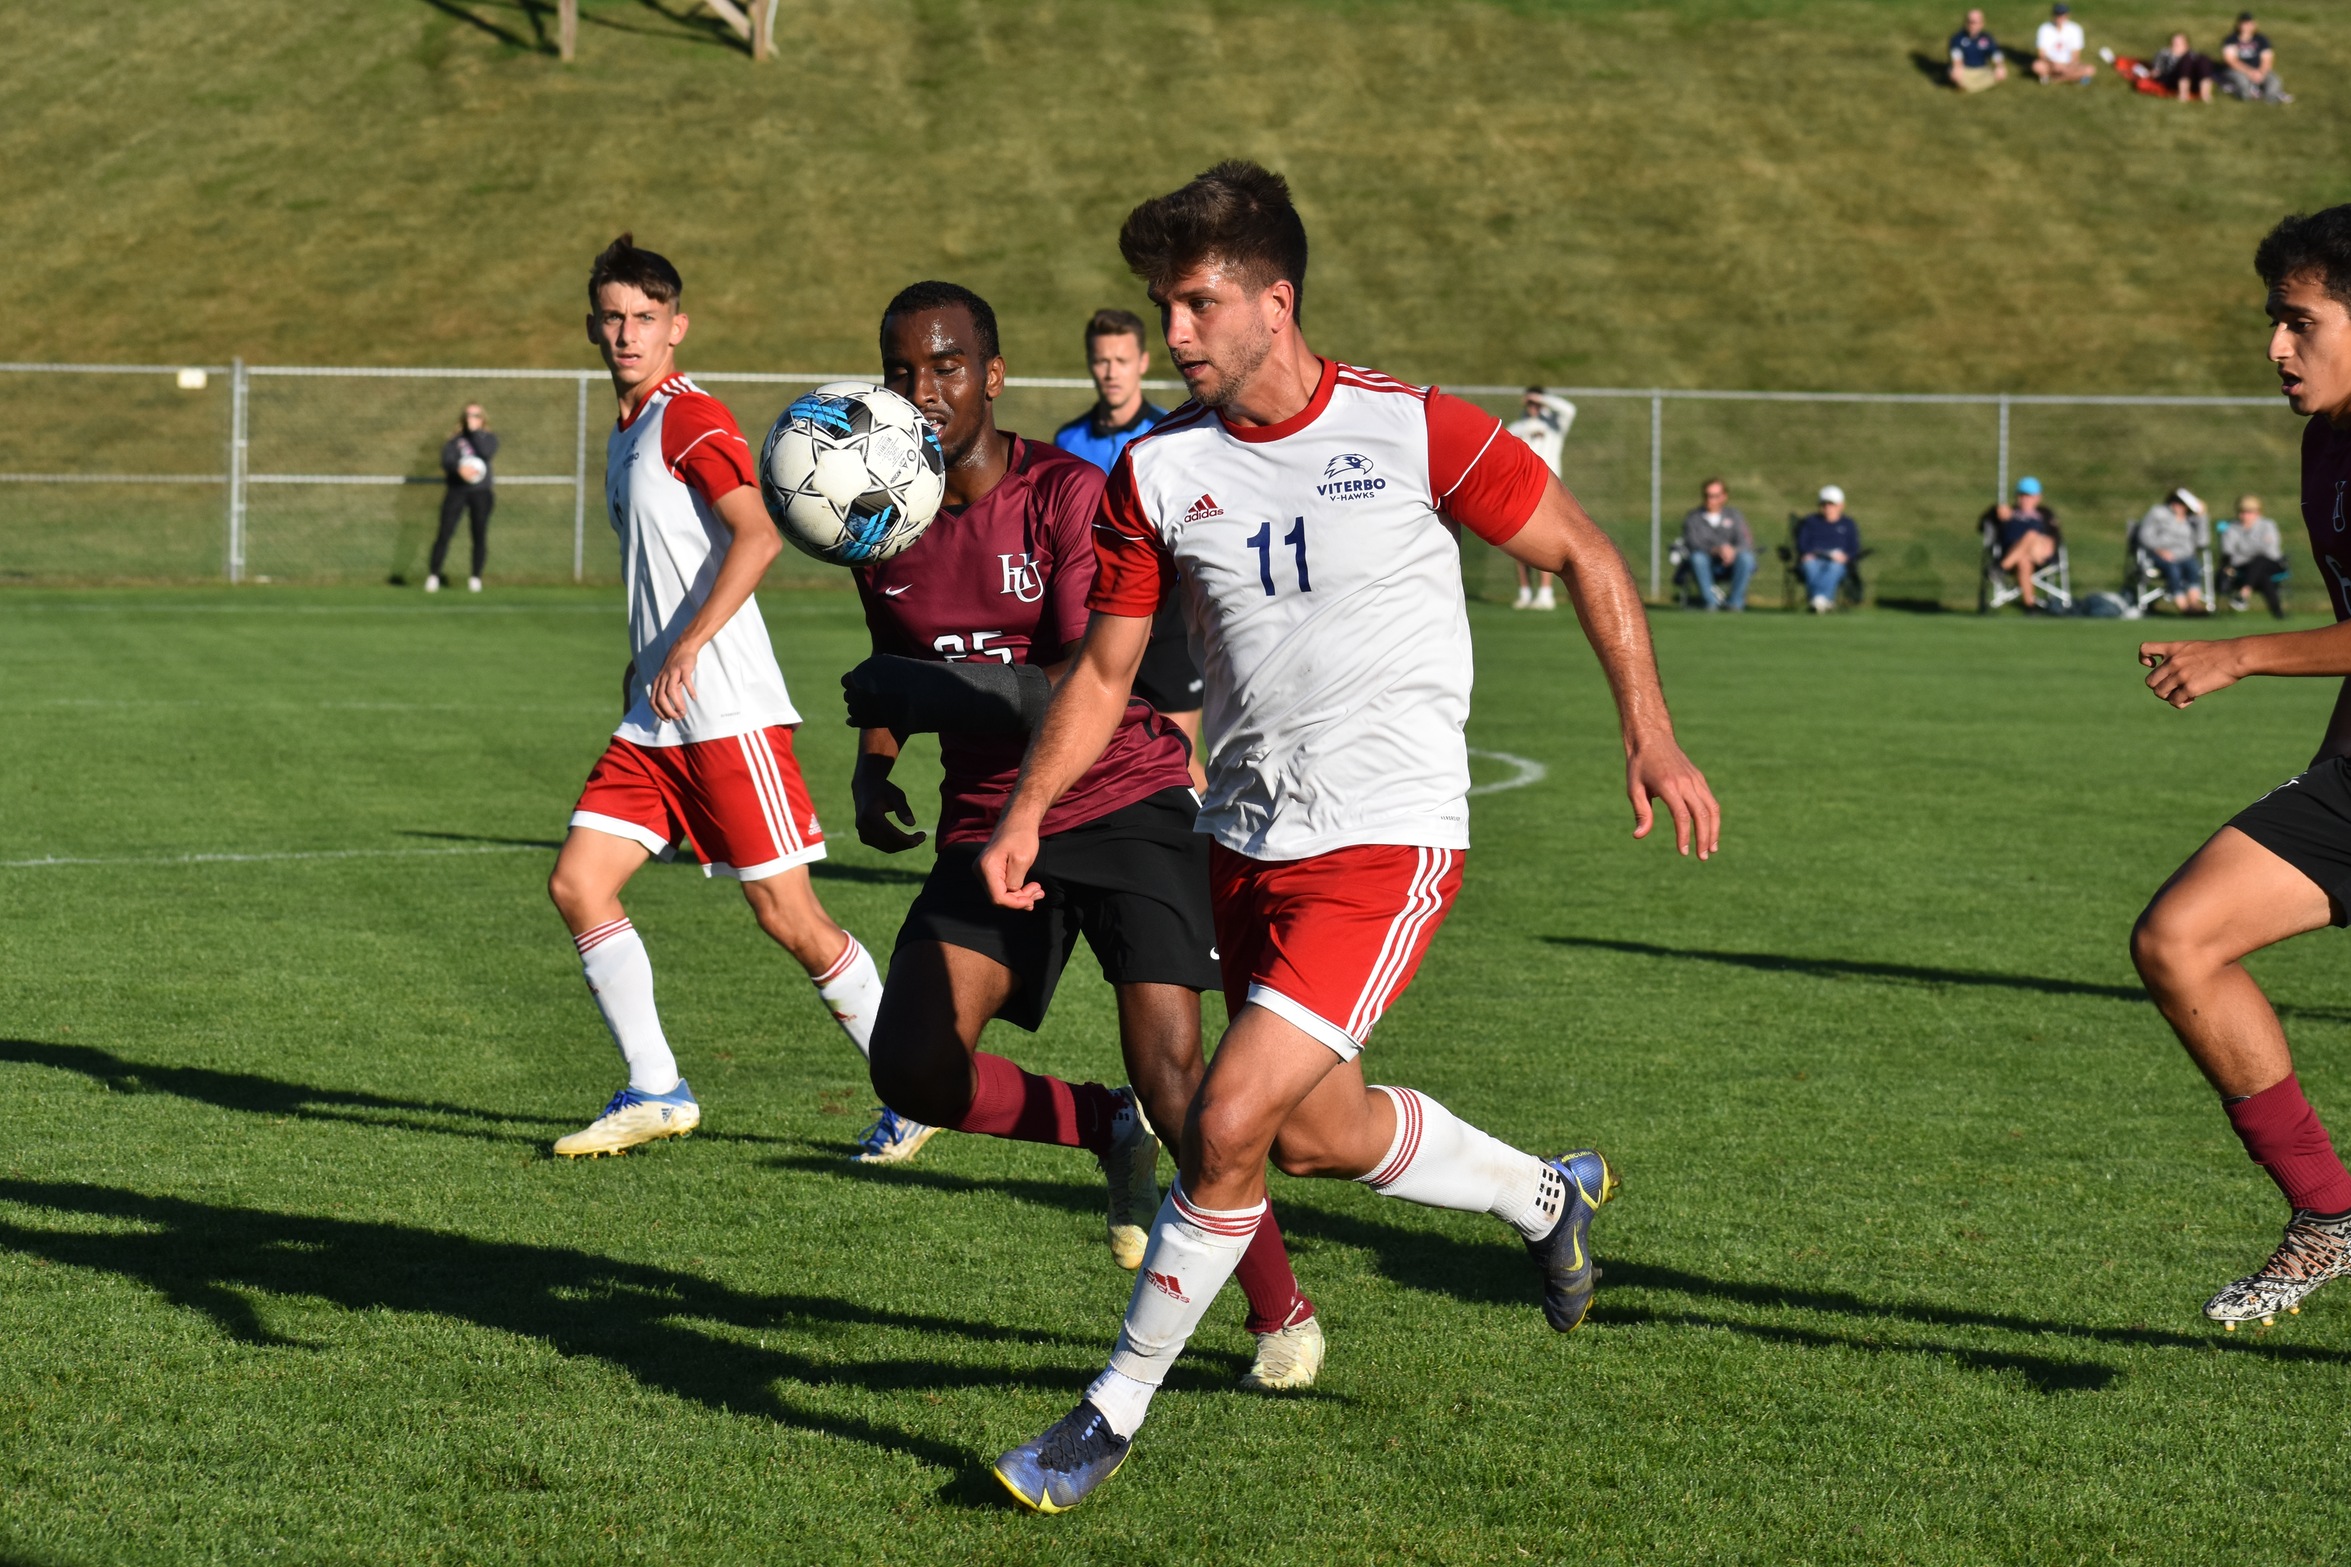 V-Hawks Earn 1-0 Win at Morningside to Remain Undefeated